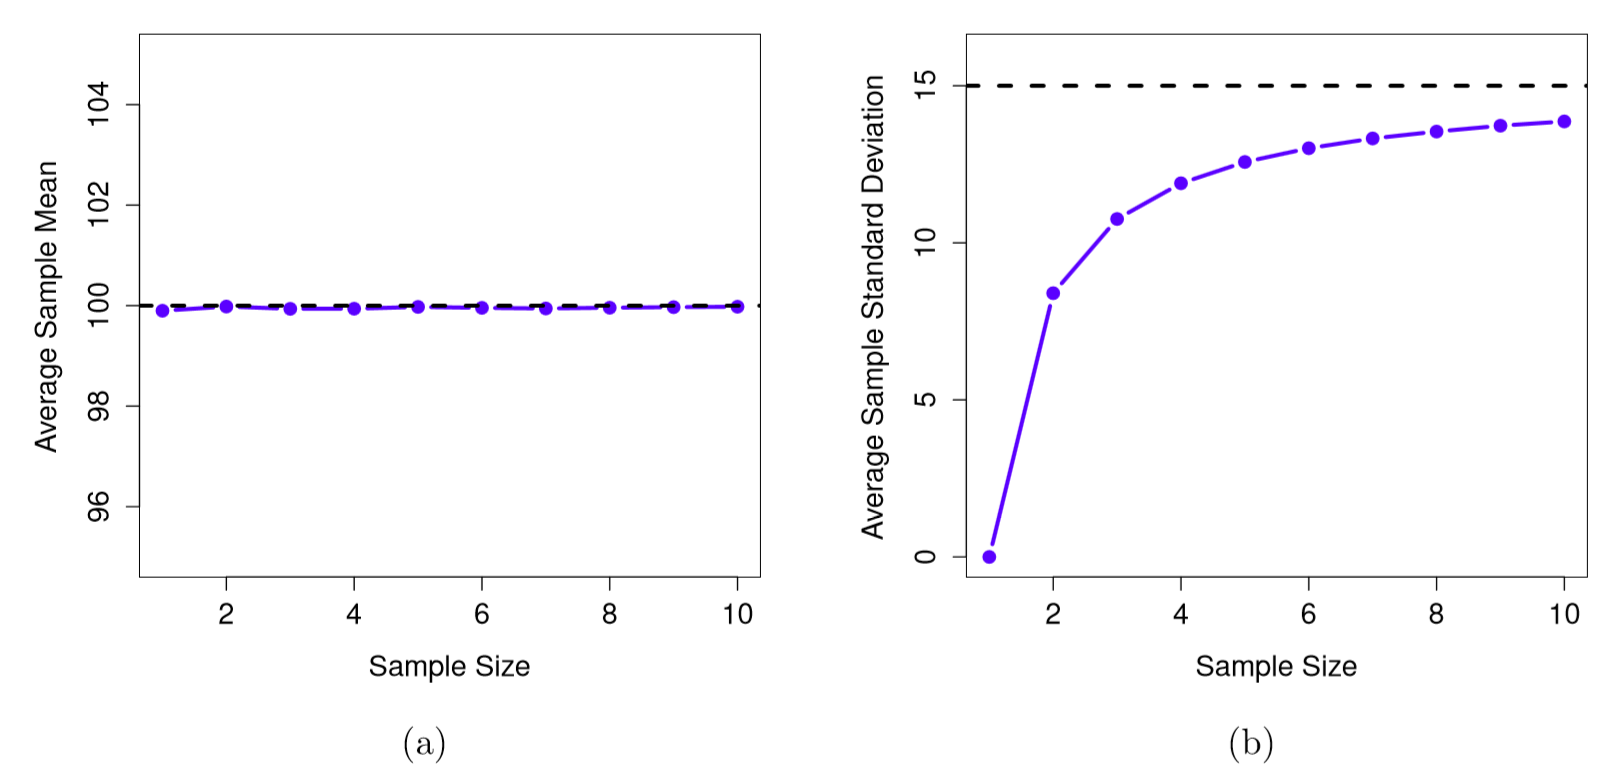 An illustration of the fact that the sample mean is an unbiased estimator of the population mean (panel a), but the sample standard deviation is a biased estimator of the population standard deviation (panel b). To generate the figure, I generated 10,000 simulated data sets with 1 observation each, 10,000 more with 2 observations, and so on up to a sample size of 10. Each data set consisted of fake IQ data: that is, the data were normally distributed with a true population mean of 100 and standard deviation 15. *On average*, the sample means turn out to be 100, regardless of sample size (panel a). However, the sample standard deviations turn out to be systematically too small (panel b), especially for small sample sizes.